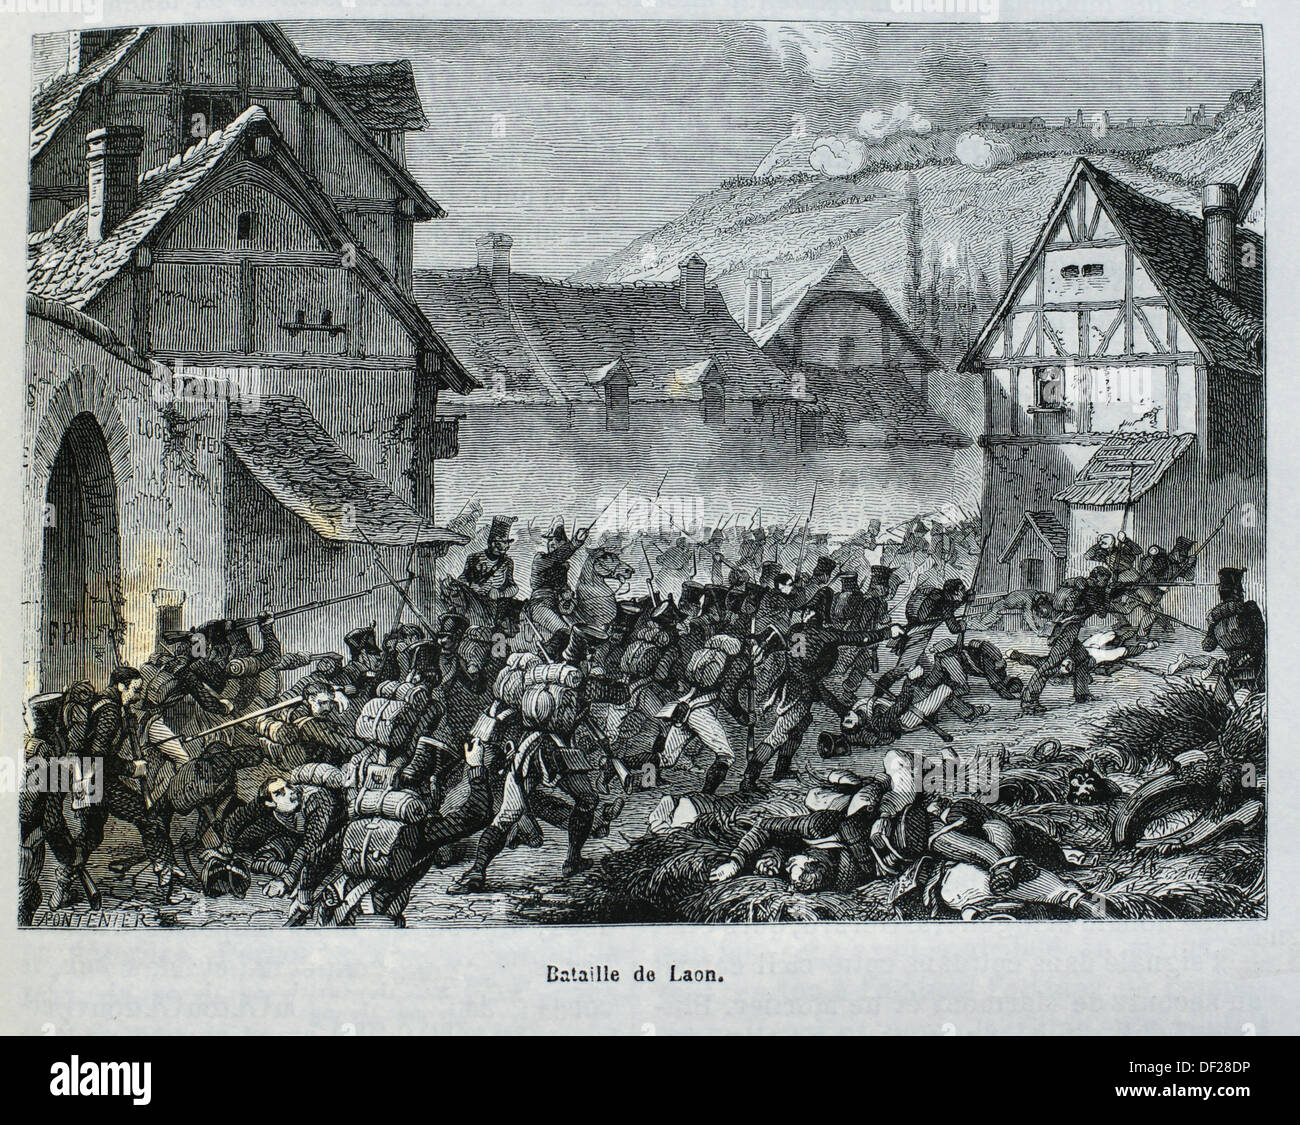 France, History, XIXc - The Battle of Laon 9-10 March 1814 was the victory of Blücher´s Prussian army over Napoleon´s French Stock Photo